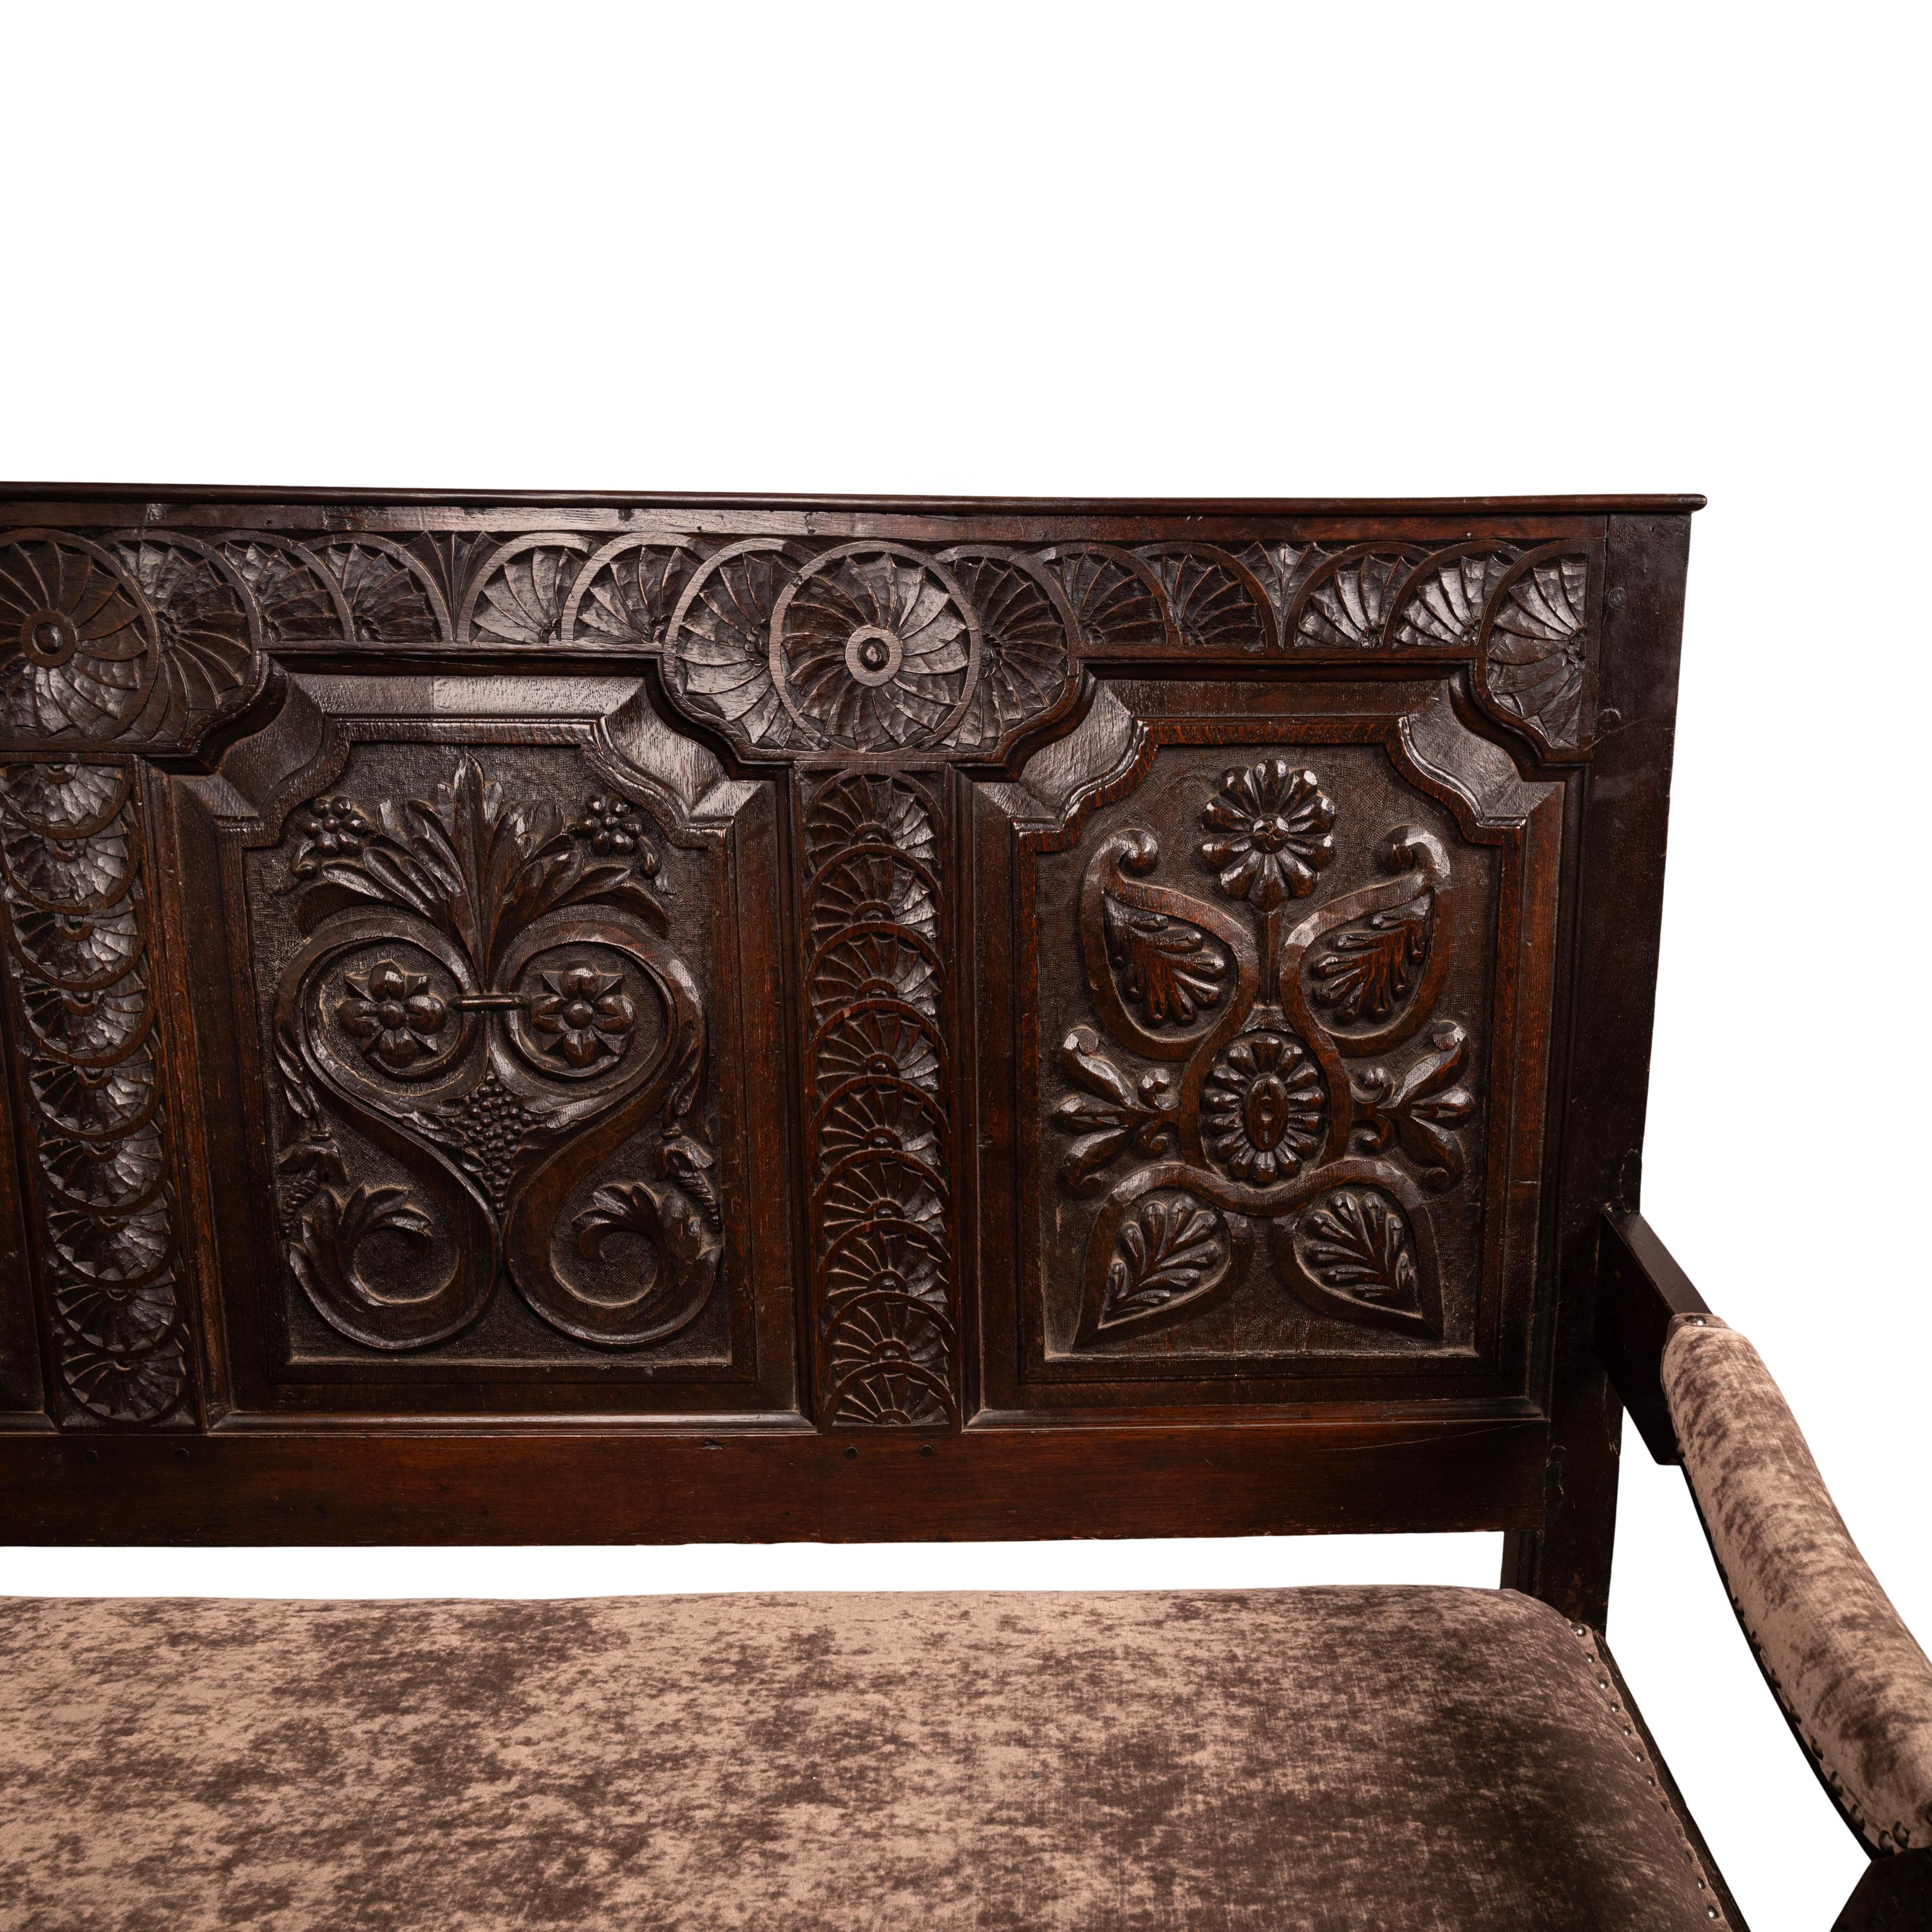 Antique English 17th Century King Charles II Carved Oak Settle Sofa Bench 1680 For Sale 4